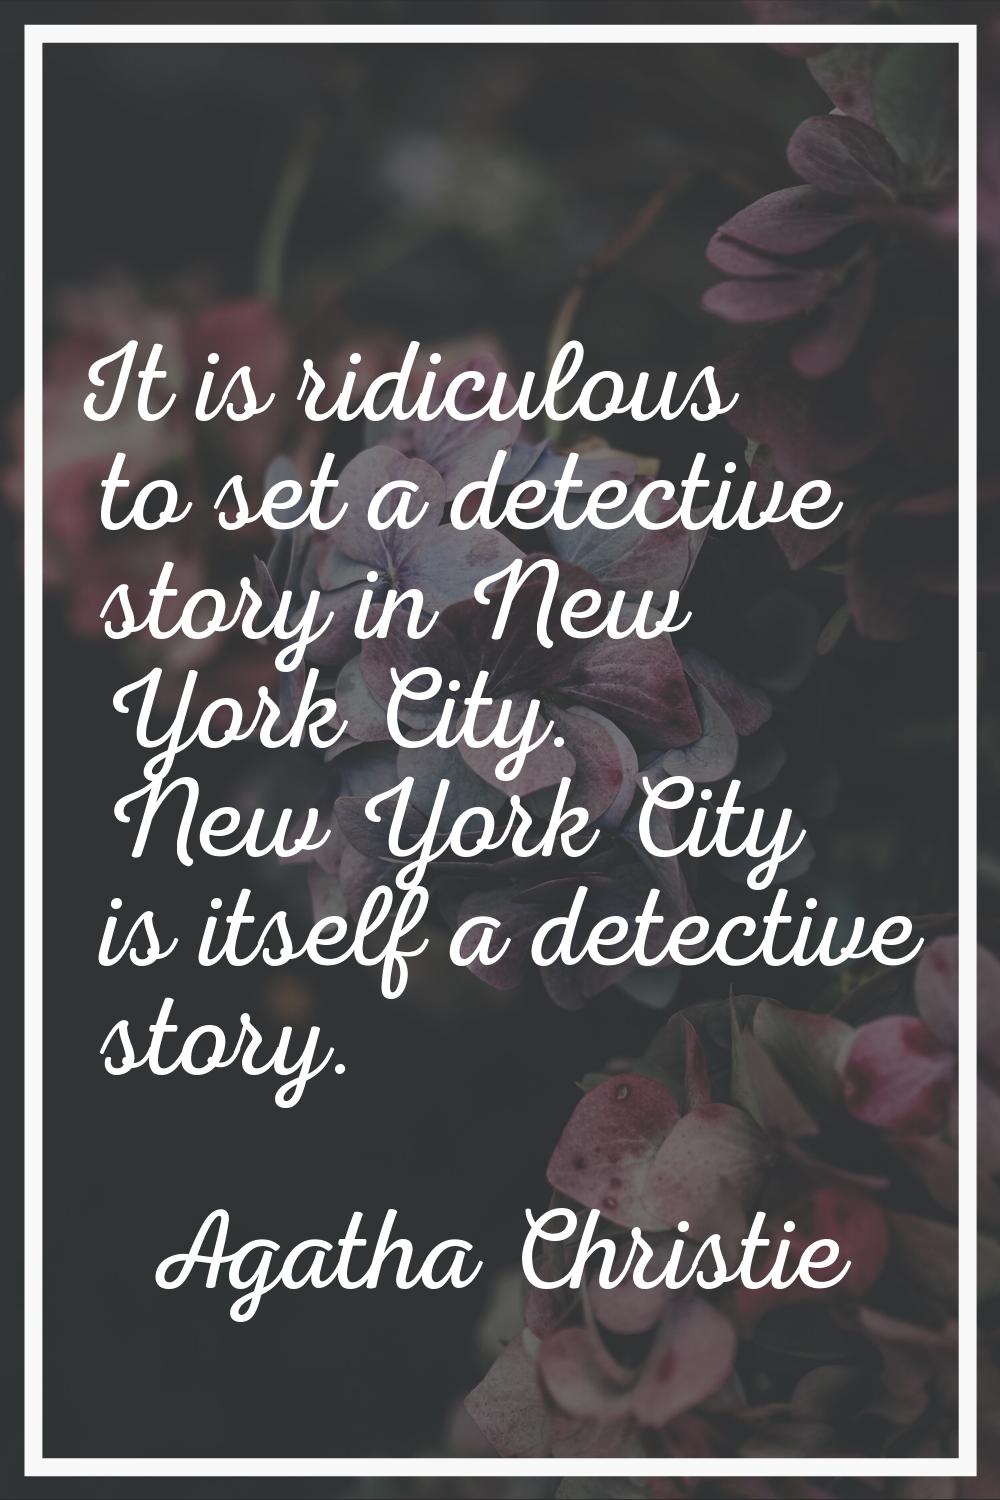 It is ridiculous to set a detective story in New York City. New York City is itself a detective sto